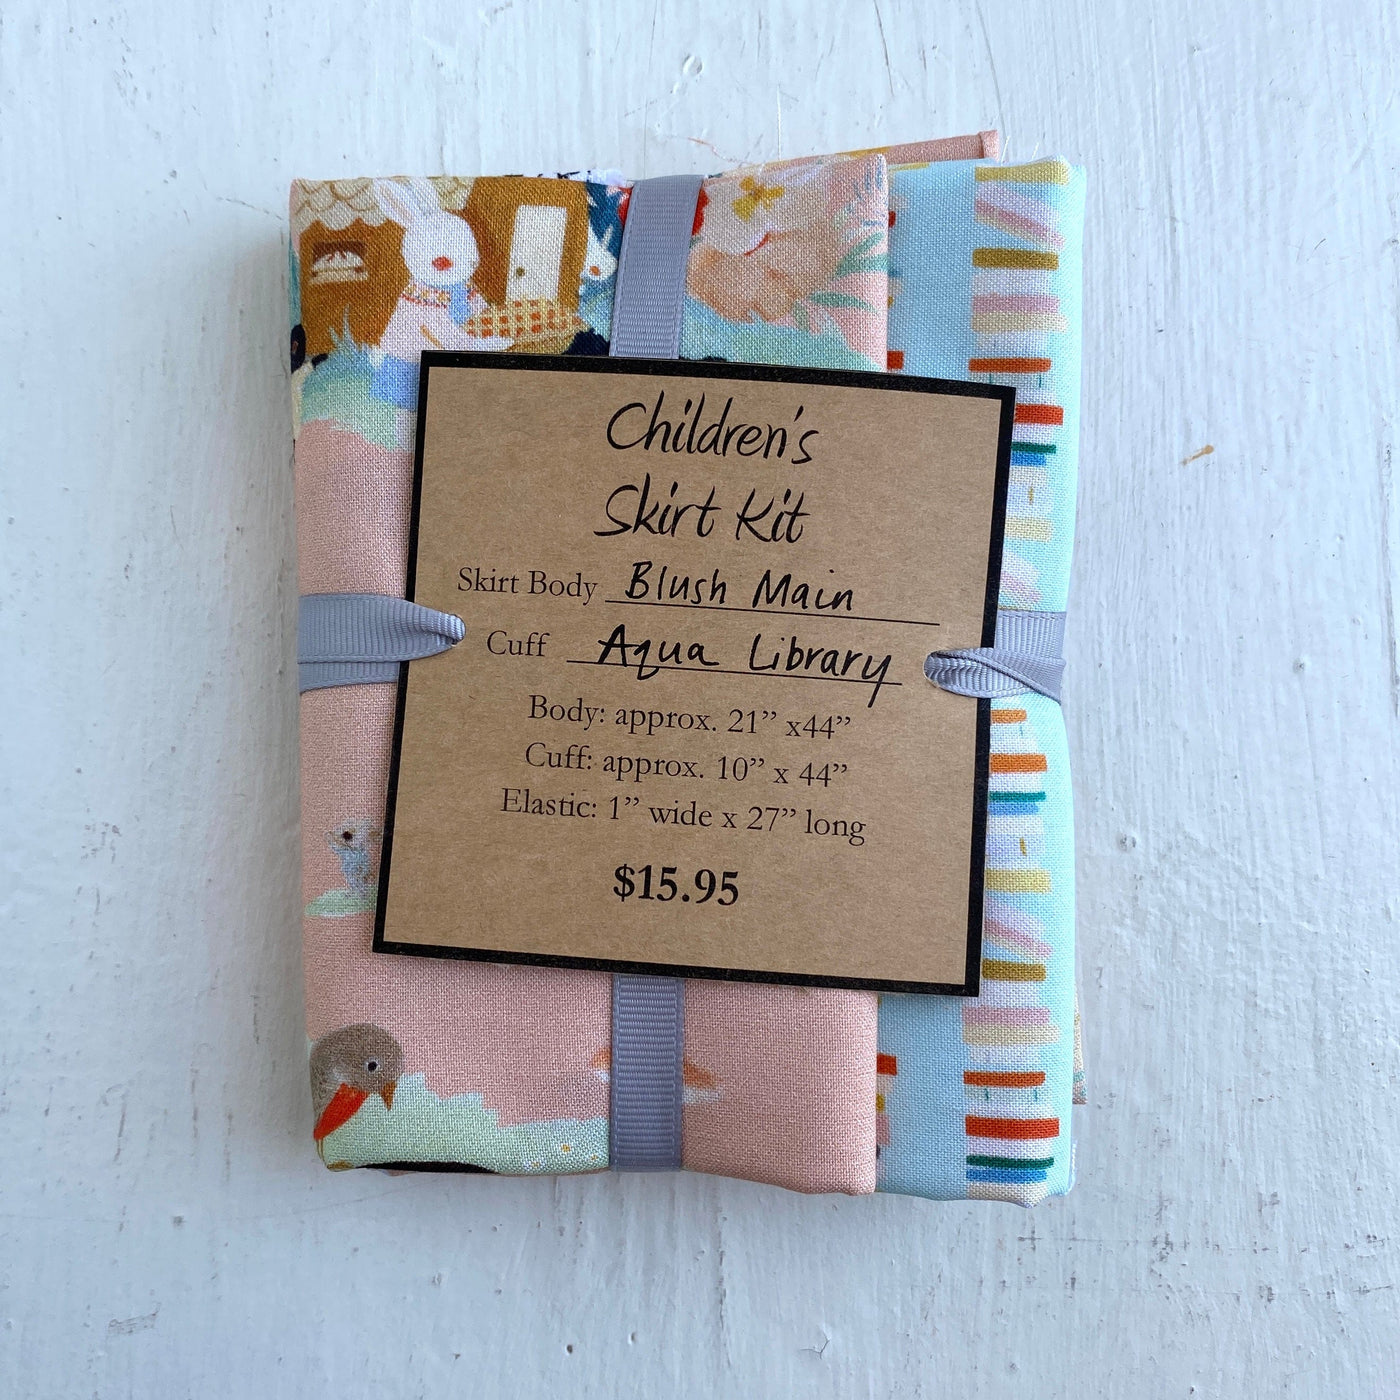 Littlest Family's Big Day - Child's Skirt Kit - Blush Main with Aqua Library Cuff